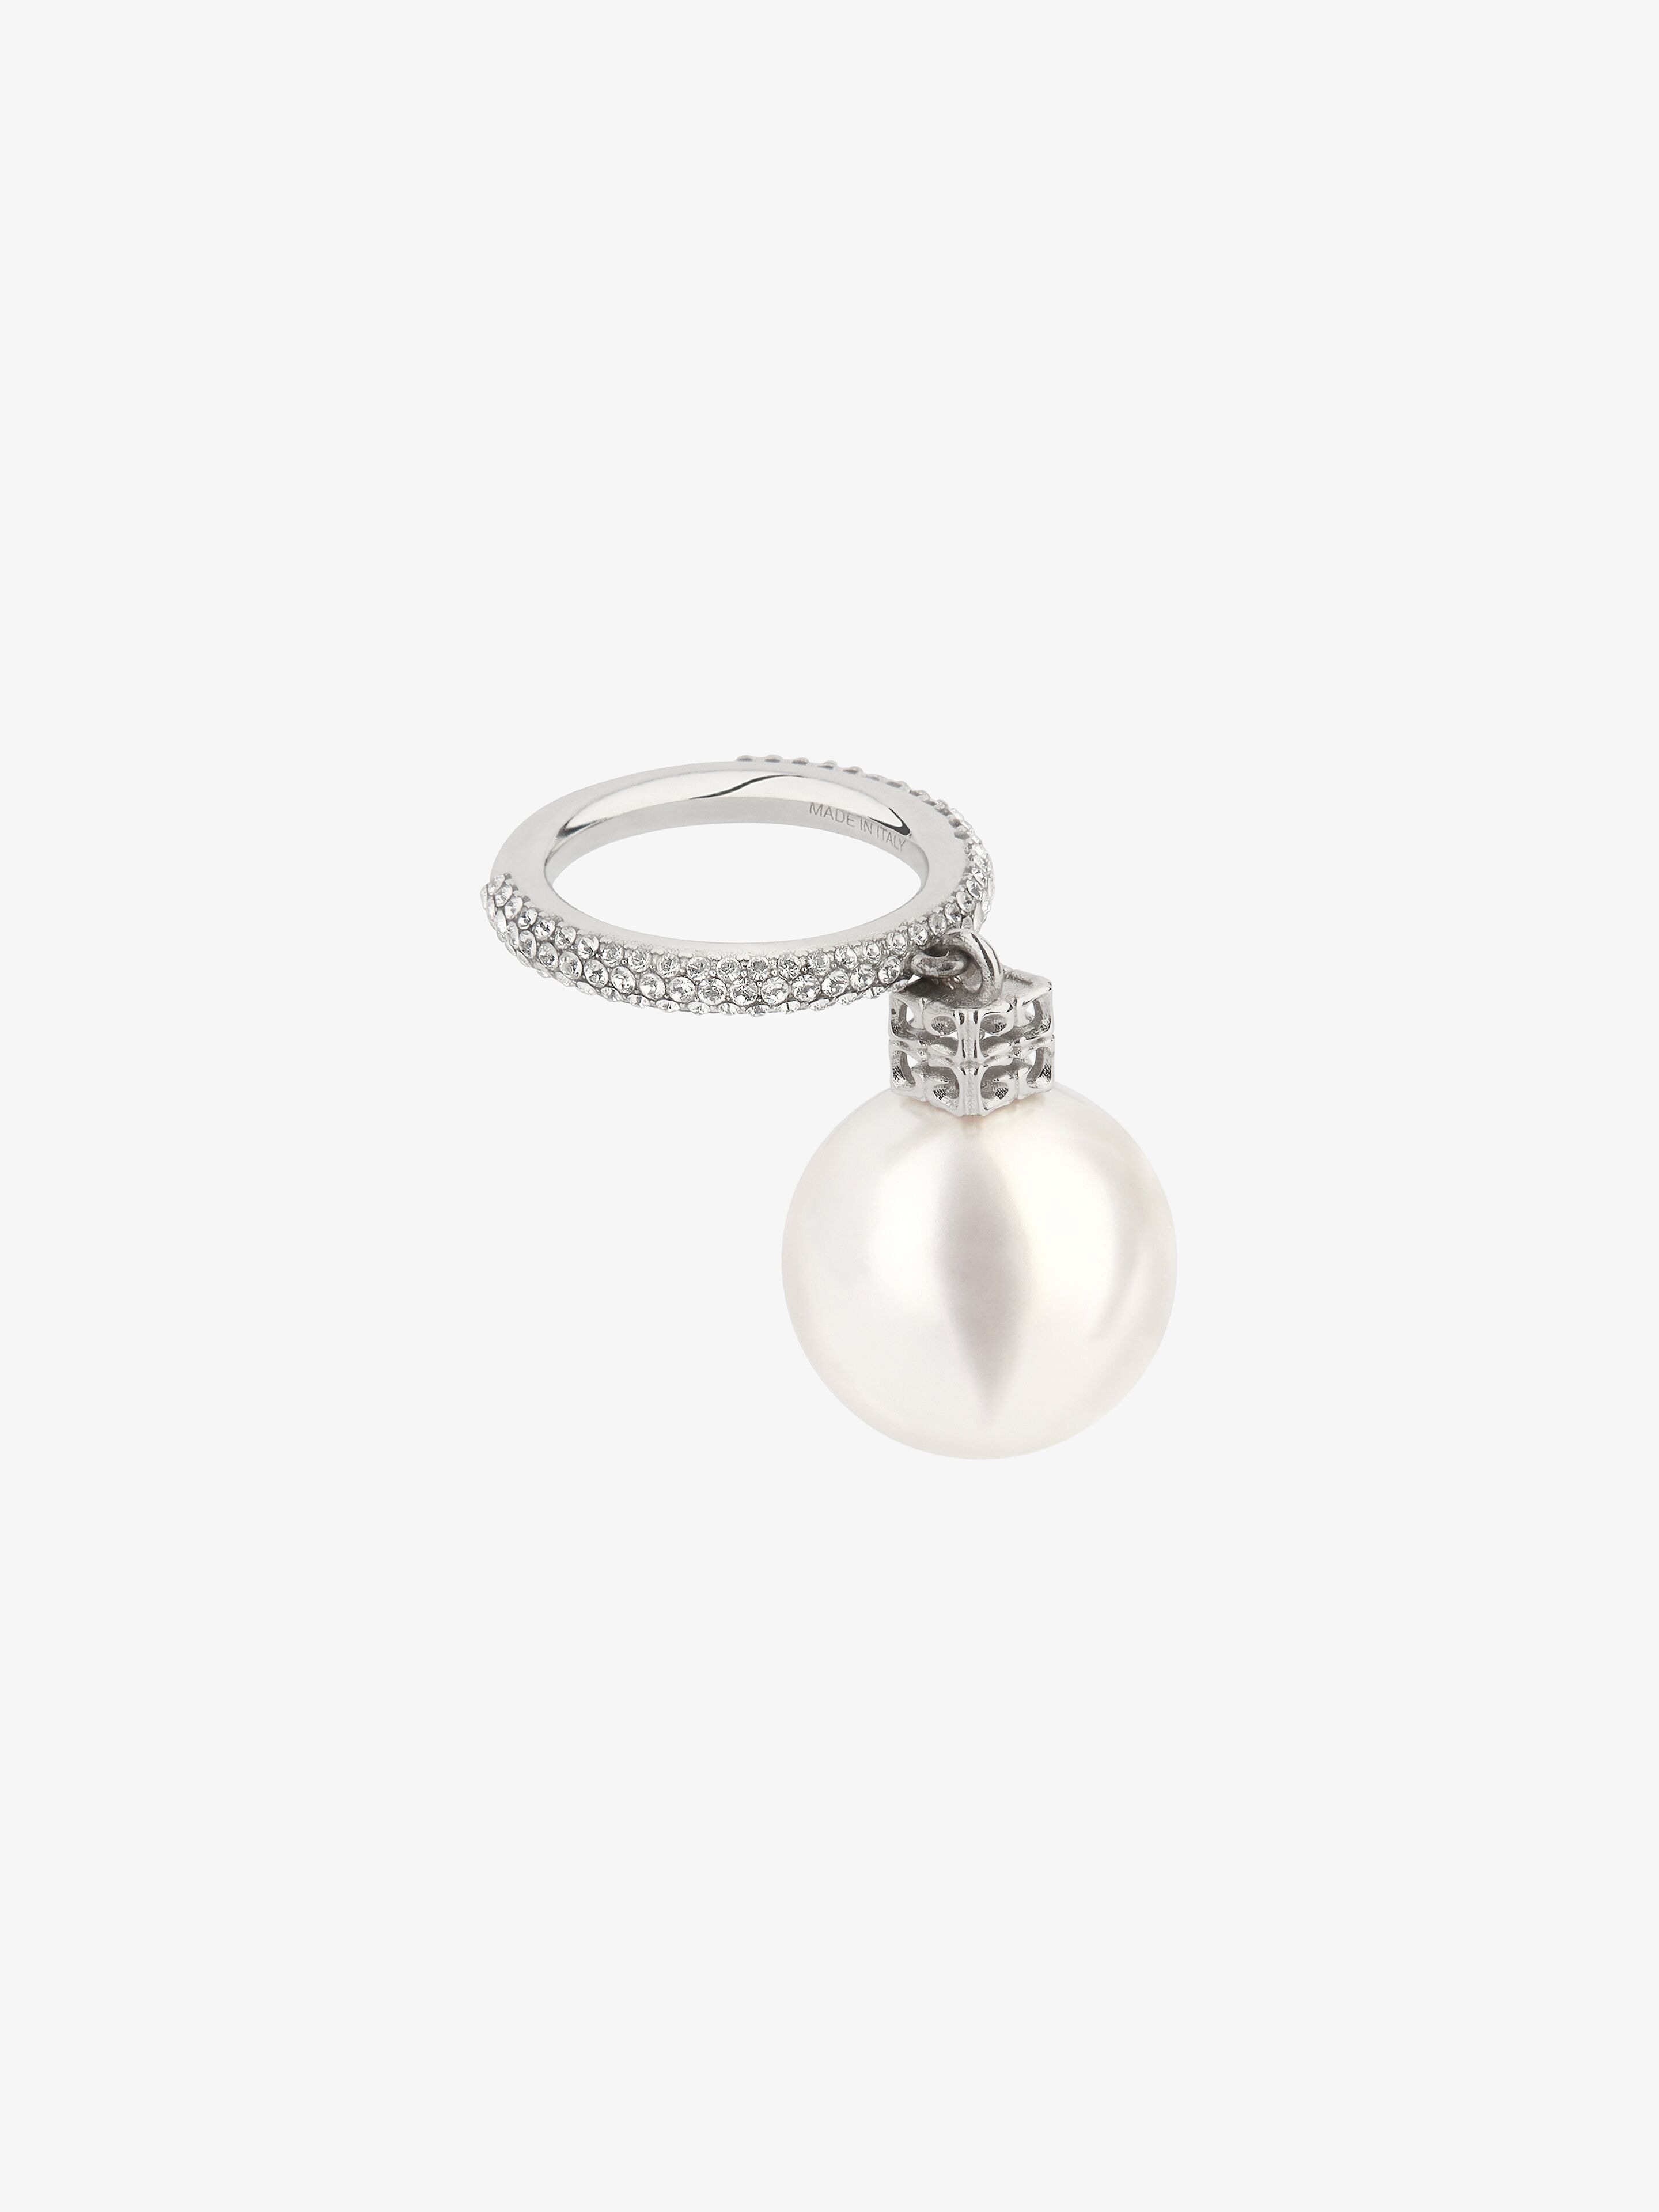 PEARL RING IN METAL WITH CRYSTALS - 4